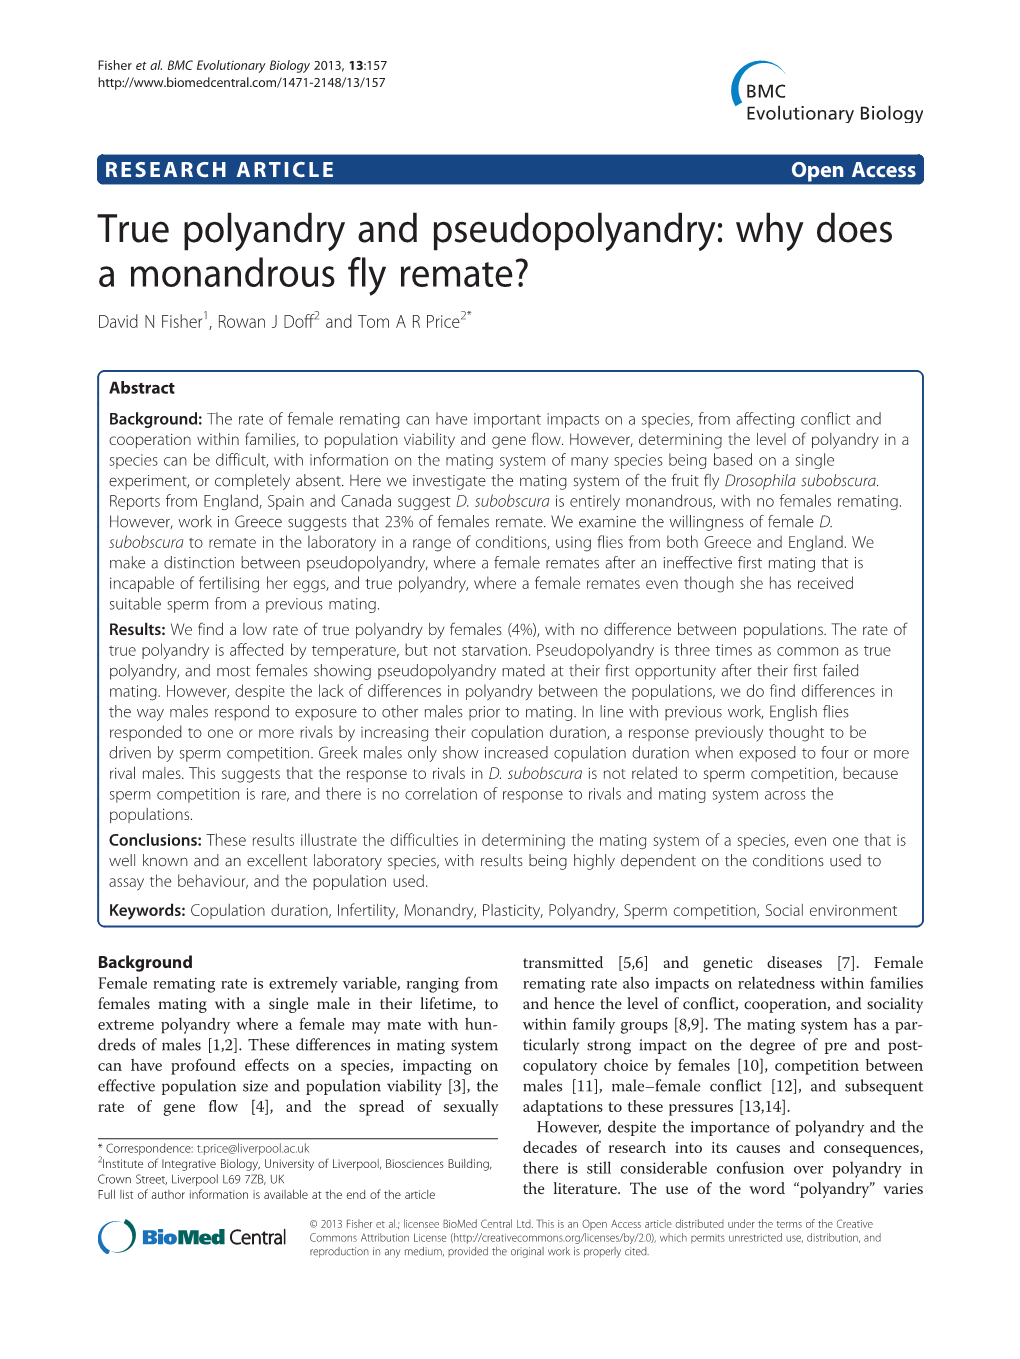 True Polyandry and Pseudopolyandry: Why Does a Monandrous Fly Remate? David N Fisher1, Rowan J Doff2 and Tom a R Price2*